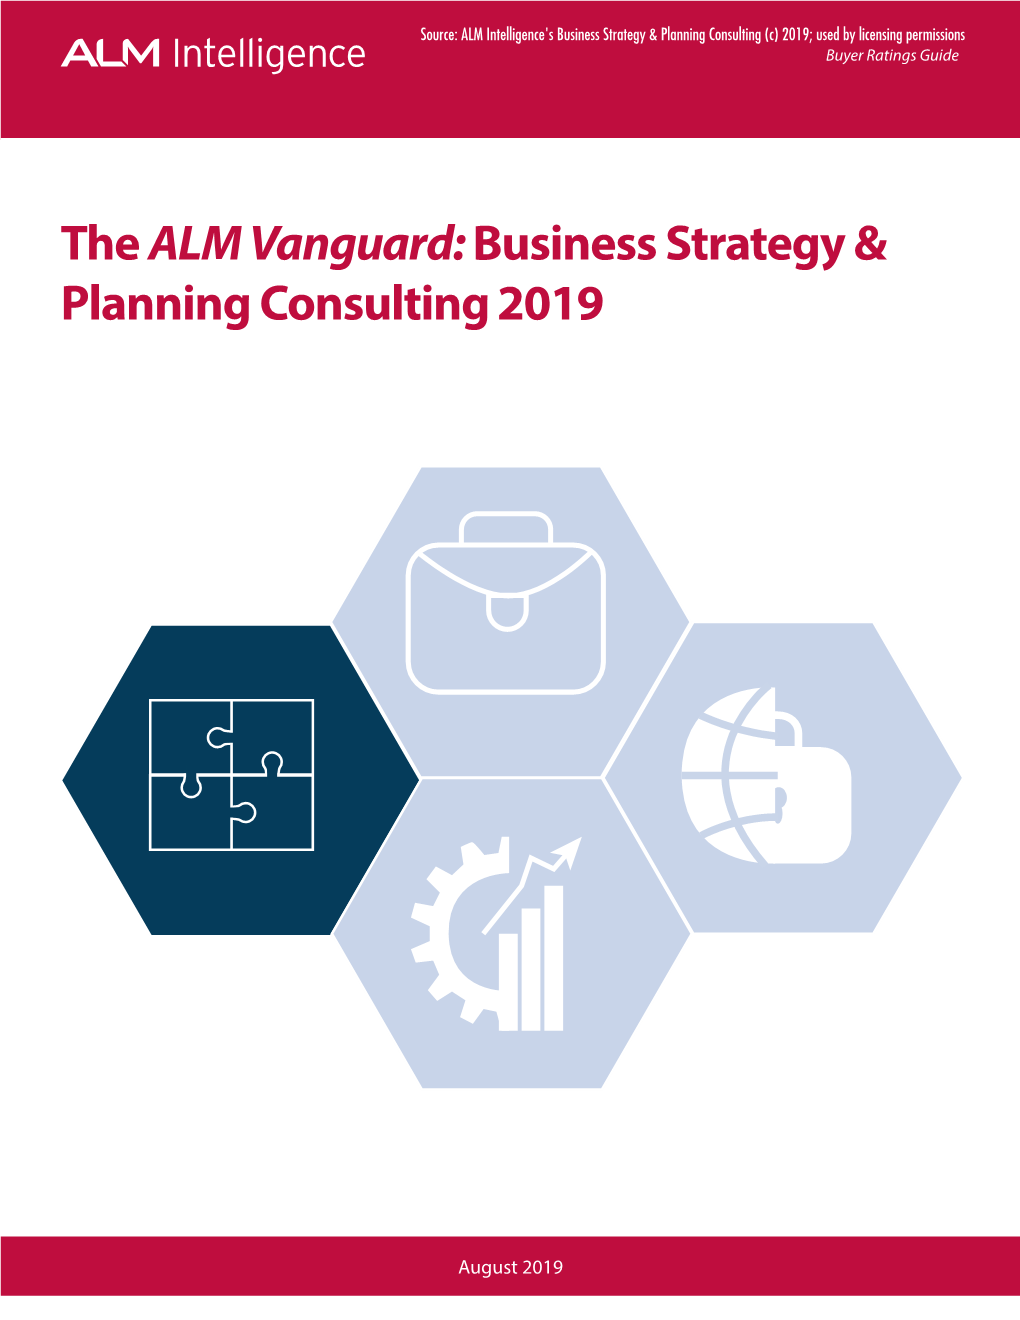 The ALM Vanguard: Business Strategy & Planning Consulting2019